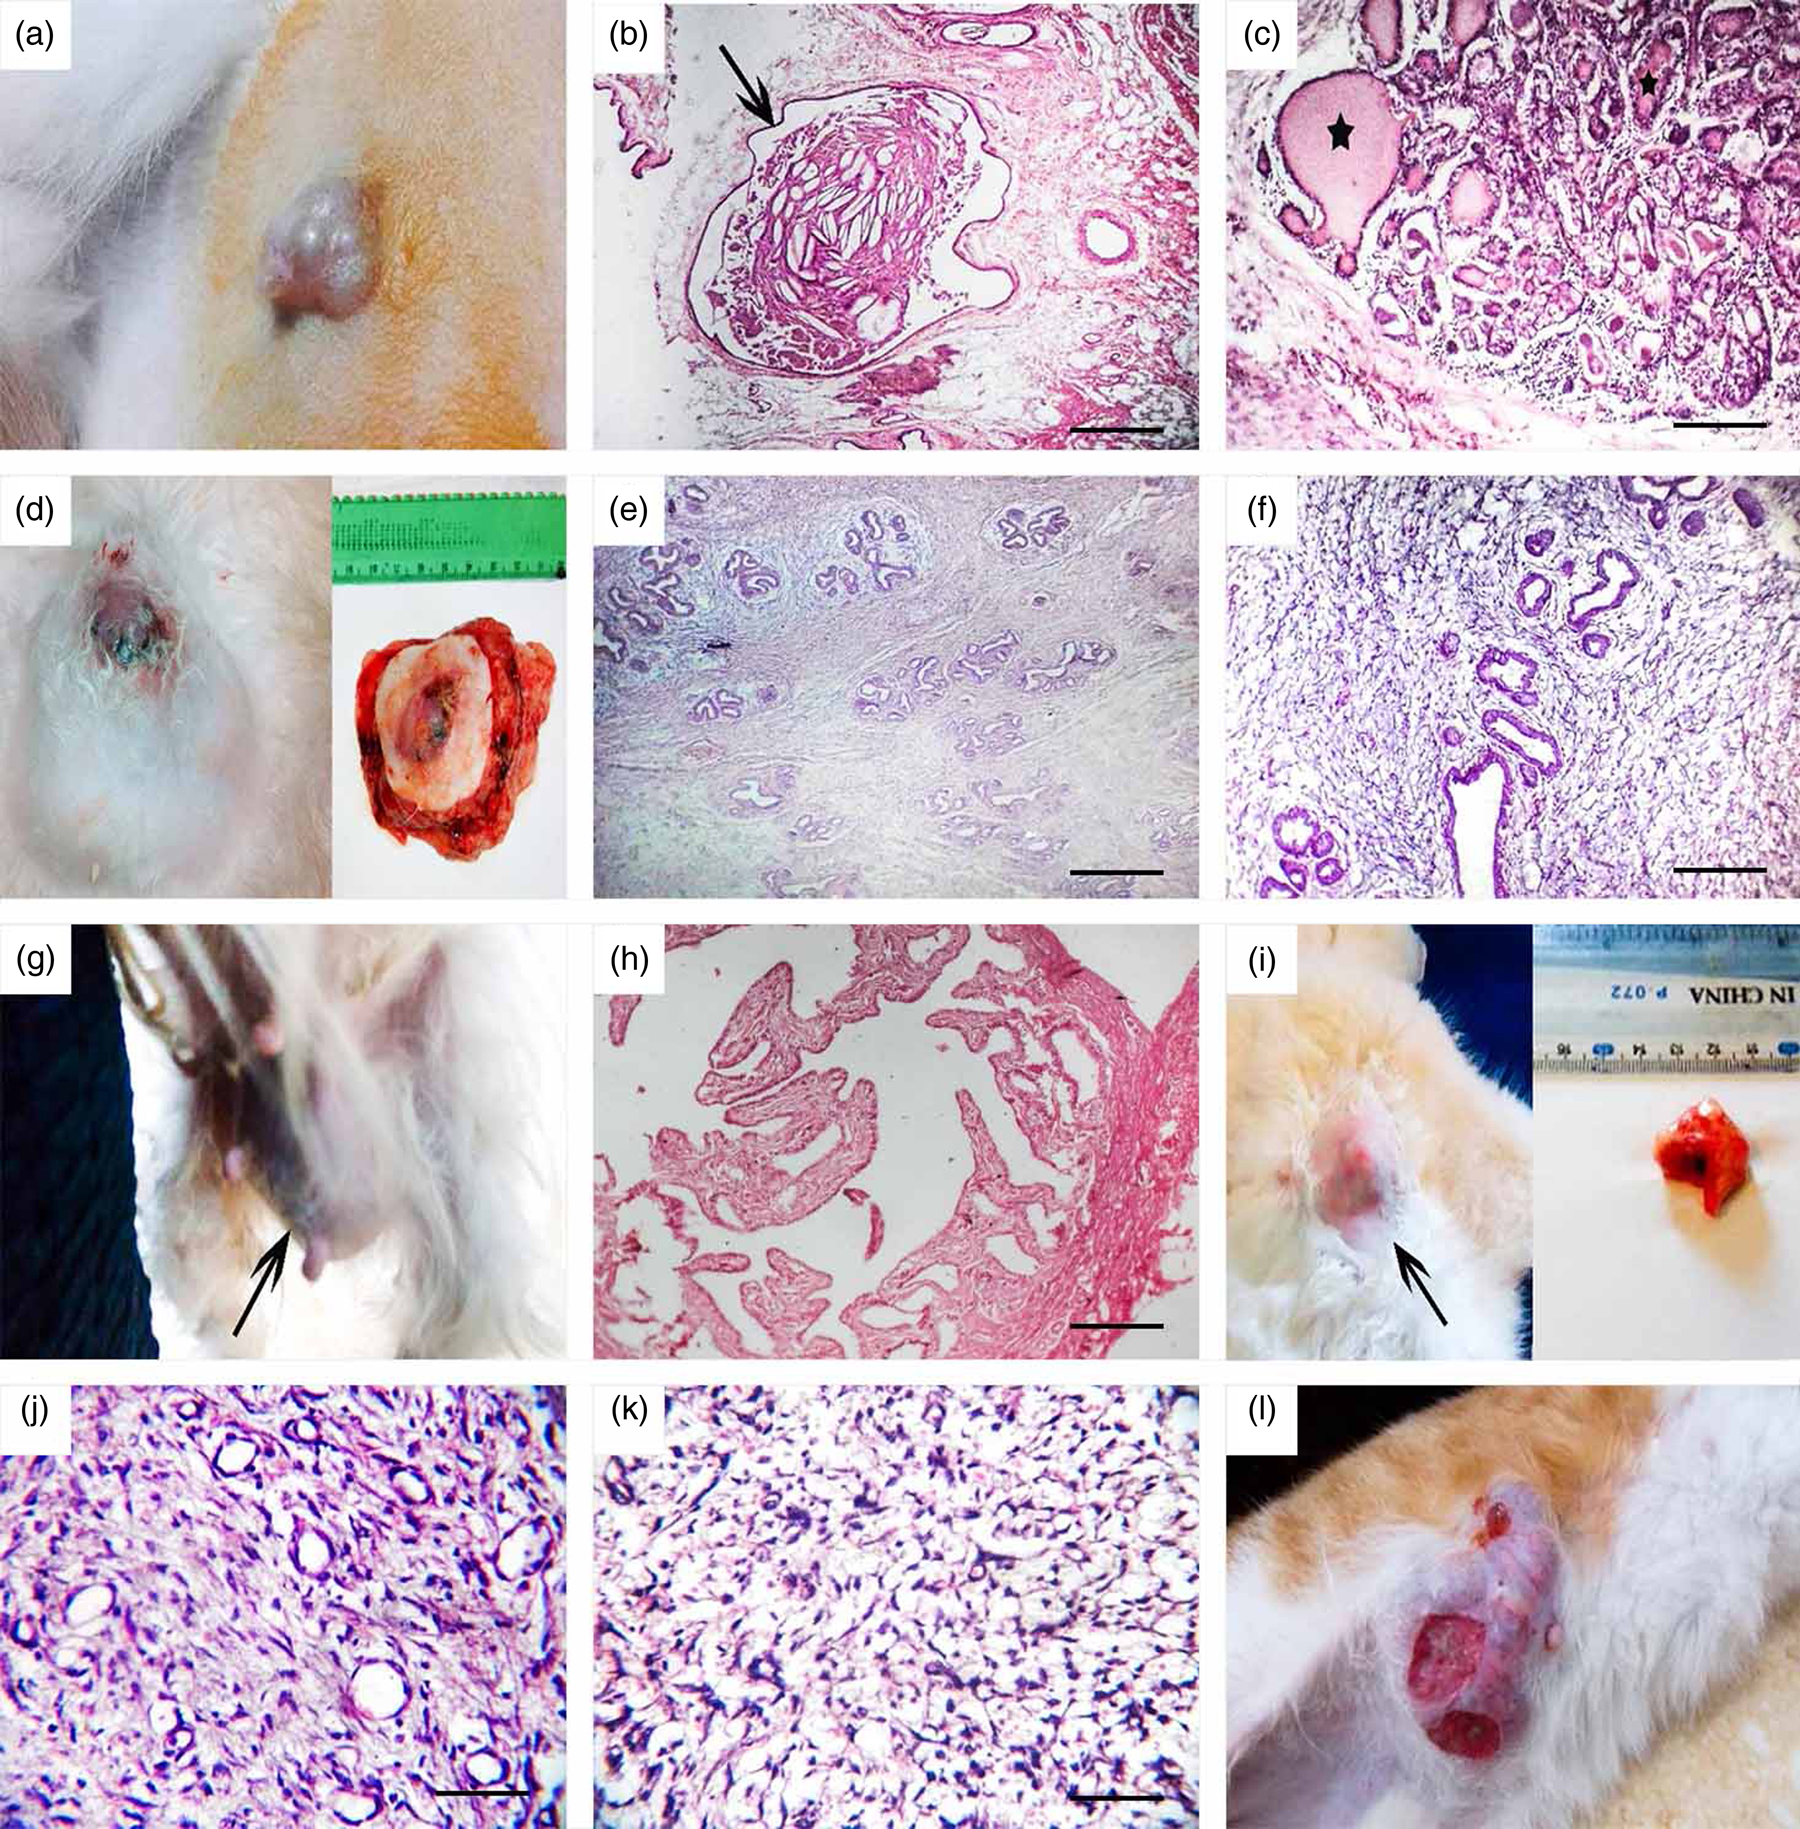 Pathological and Immunohistochemical Microscopy of Natural Cases of Canine  and Feline Neoplastic Mammary Lesions | Microscopy and Microanalysis |  Cambridge Core